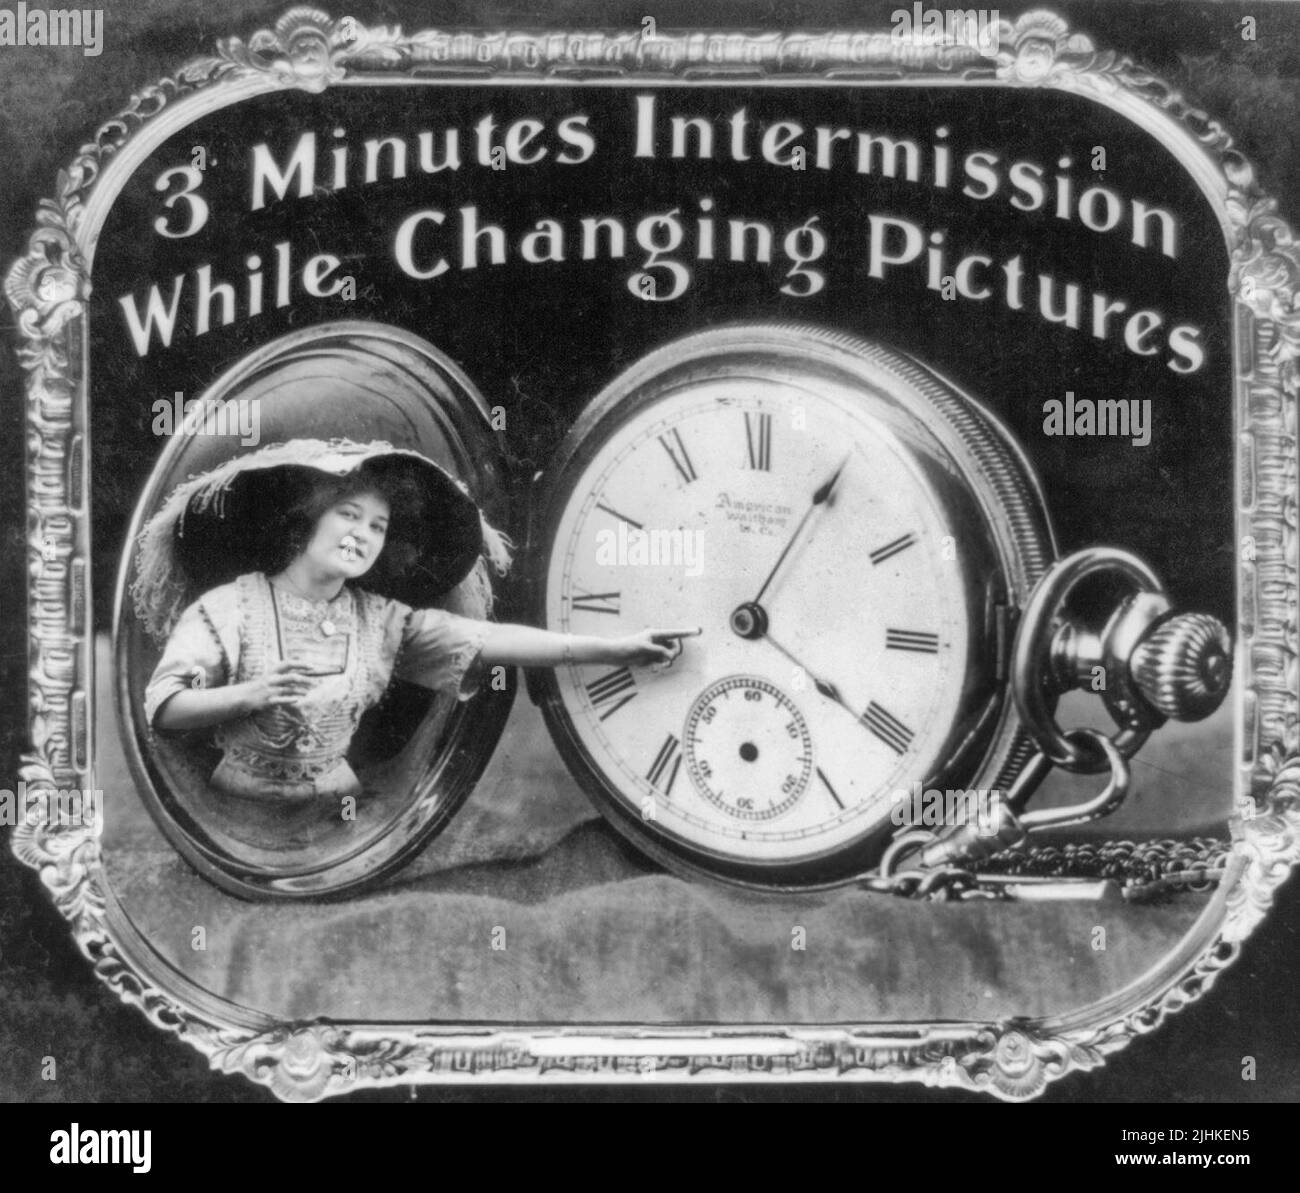 3 minutes intermission while changing pictures Photo shows woman pointing at pocket watch dial. Positive paper print from lantern slide used in motion picture theaters as announcement. Stock Photo